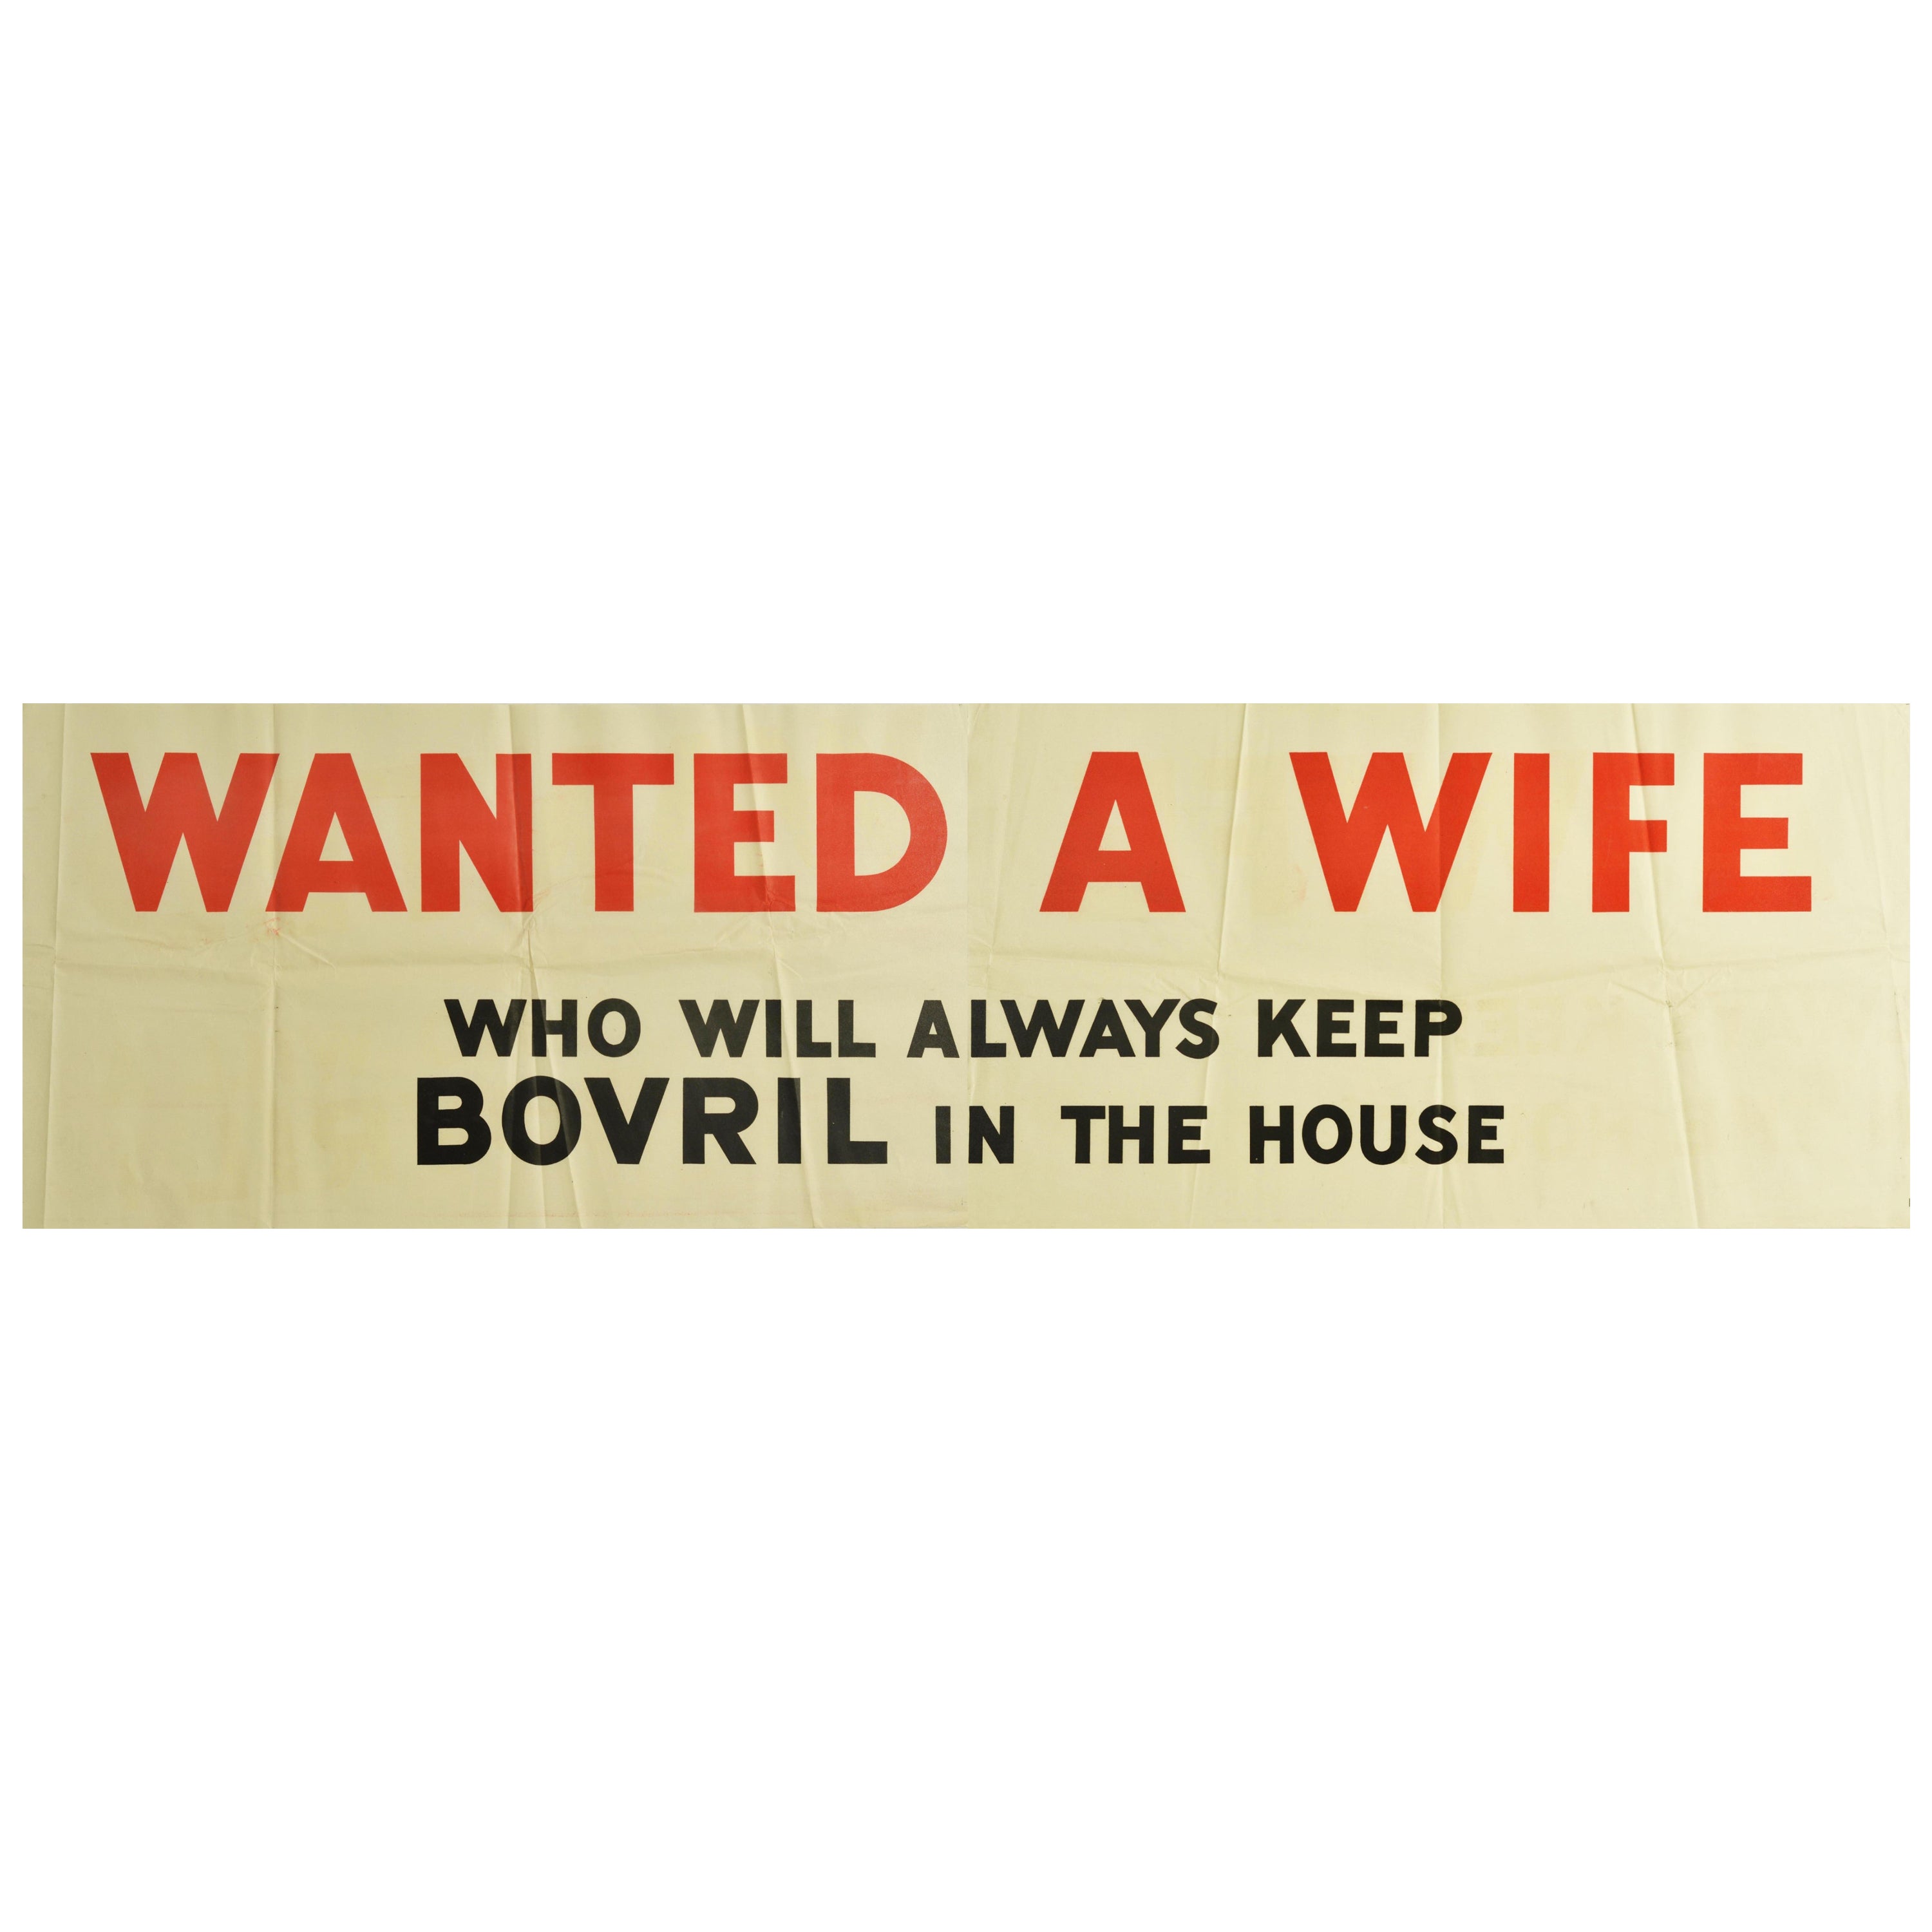 Original Vintage Poster Wanted A Wife Who Will Always Keep Bovril In The House